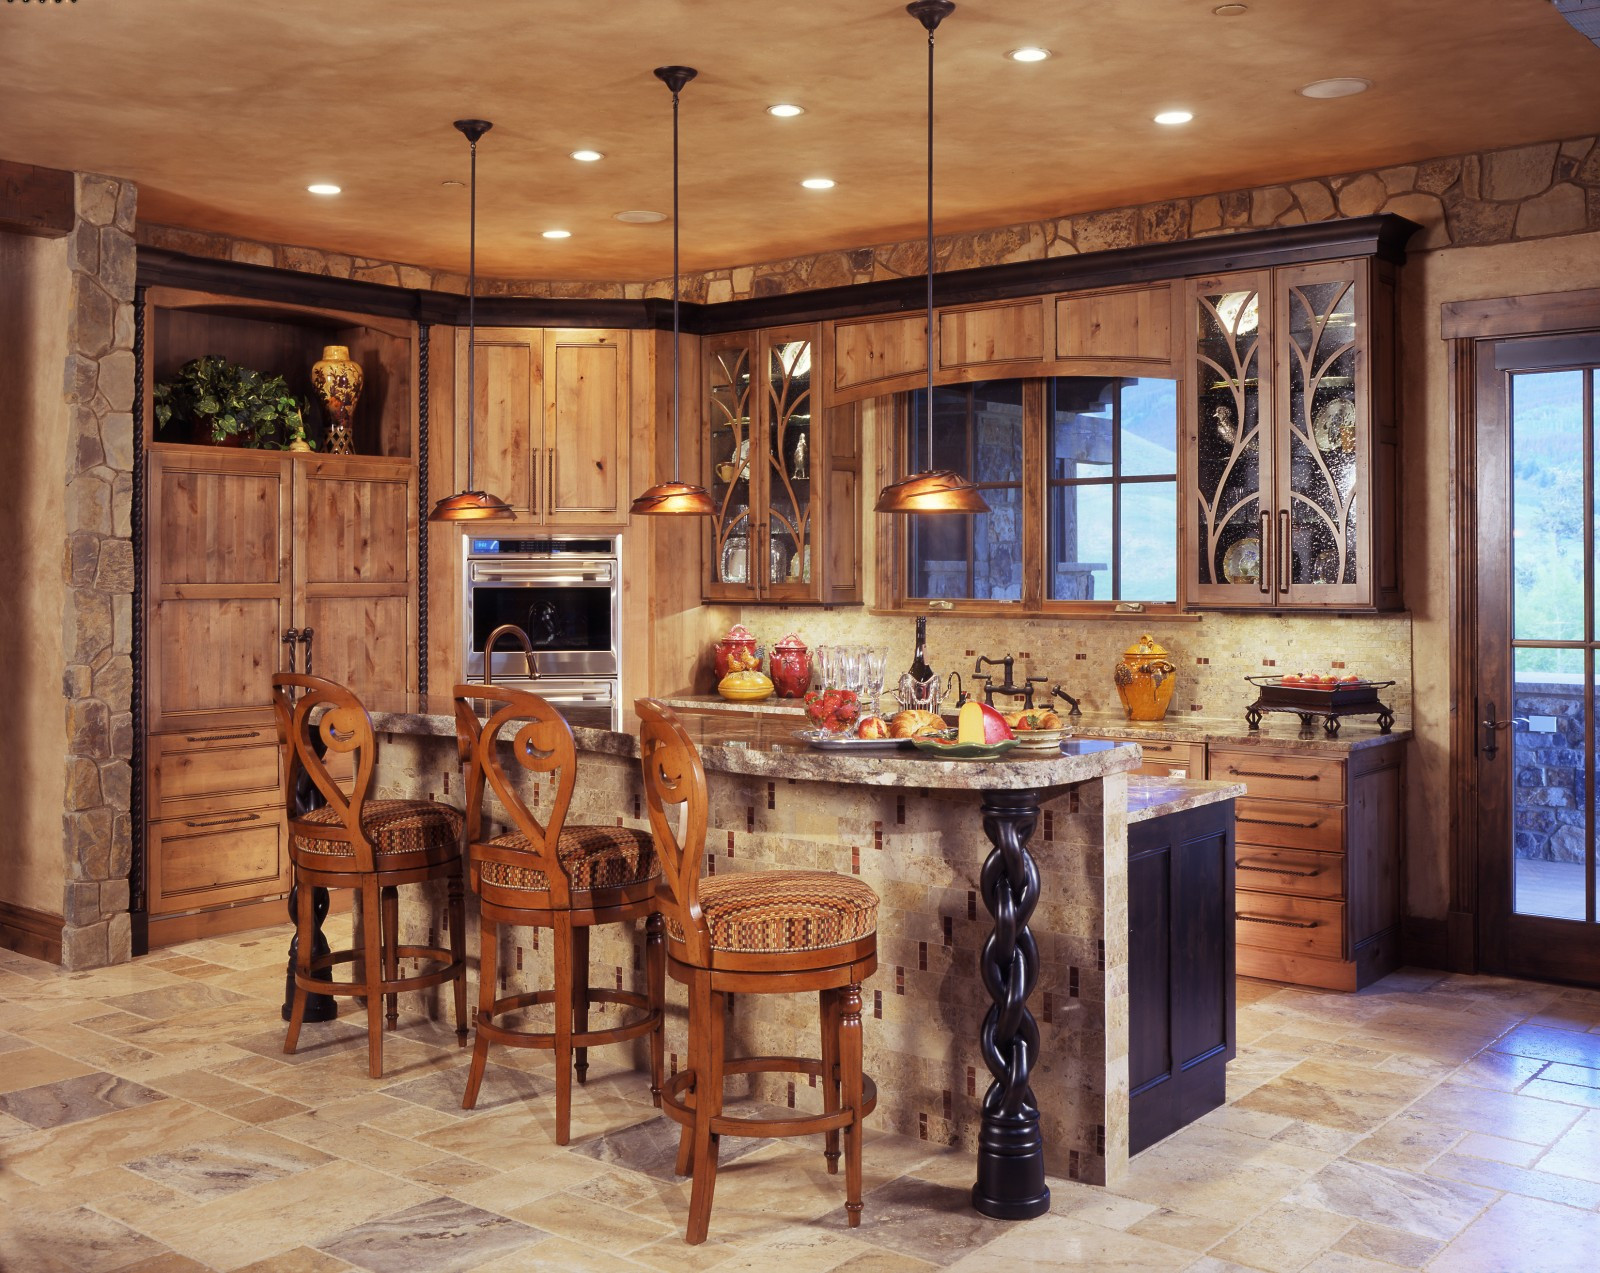 Rustic Kitchen Accessories
 Top 25 Ideas to Spruce up the Kitchen Decor in 2014 Qnud